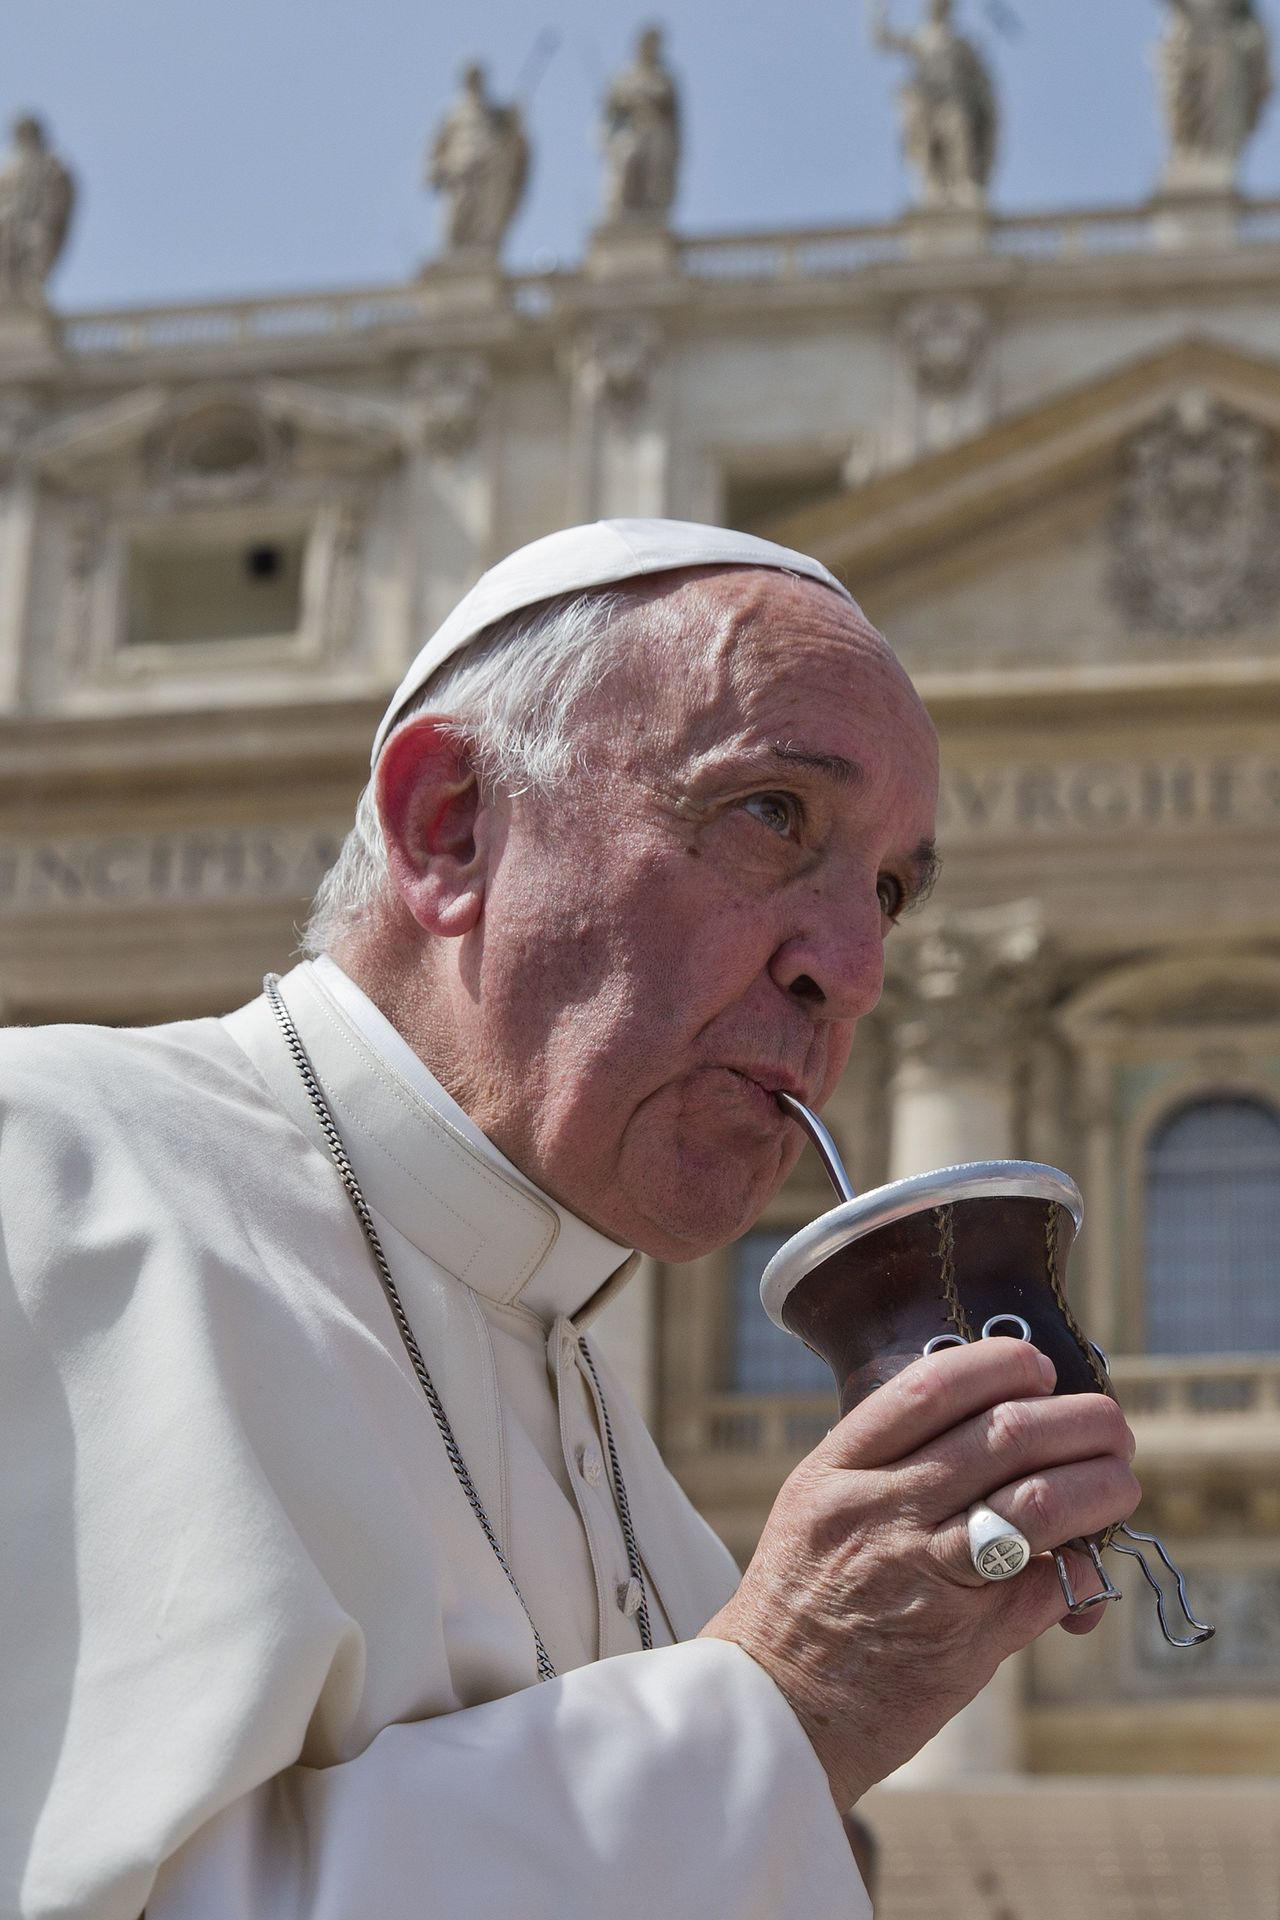 Pope Francis drinks from a mate gourd at the end of his weekly general audience at the Vatican on Wednesday.